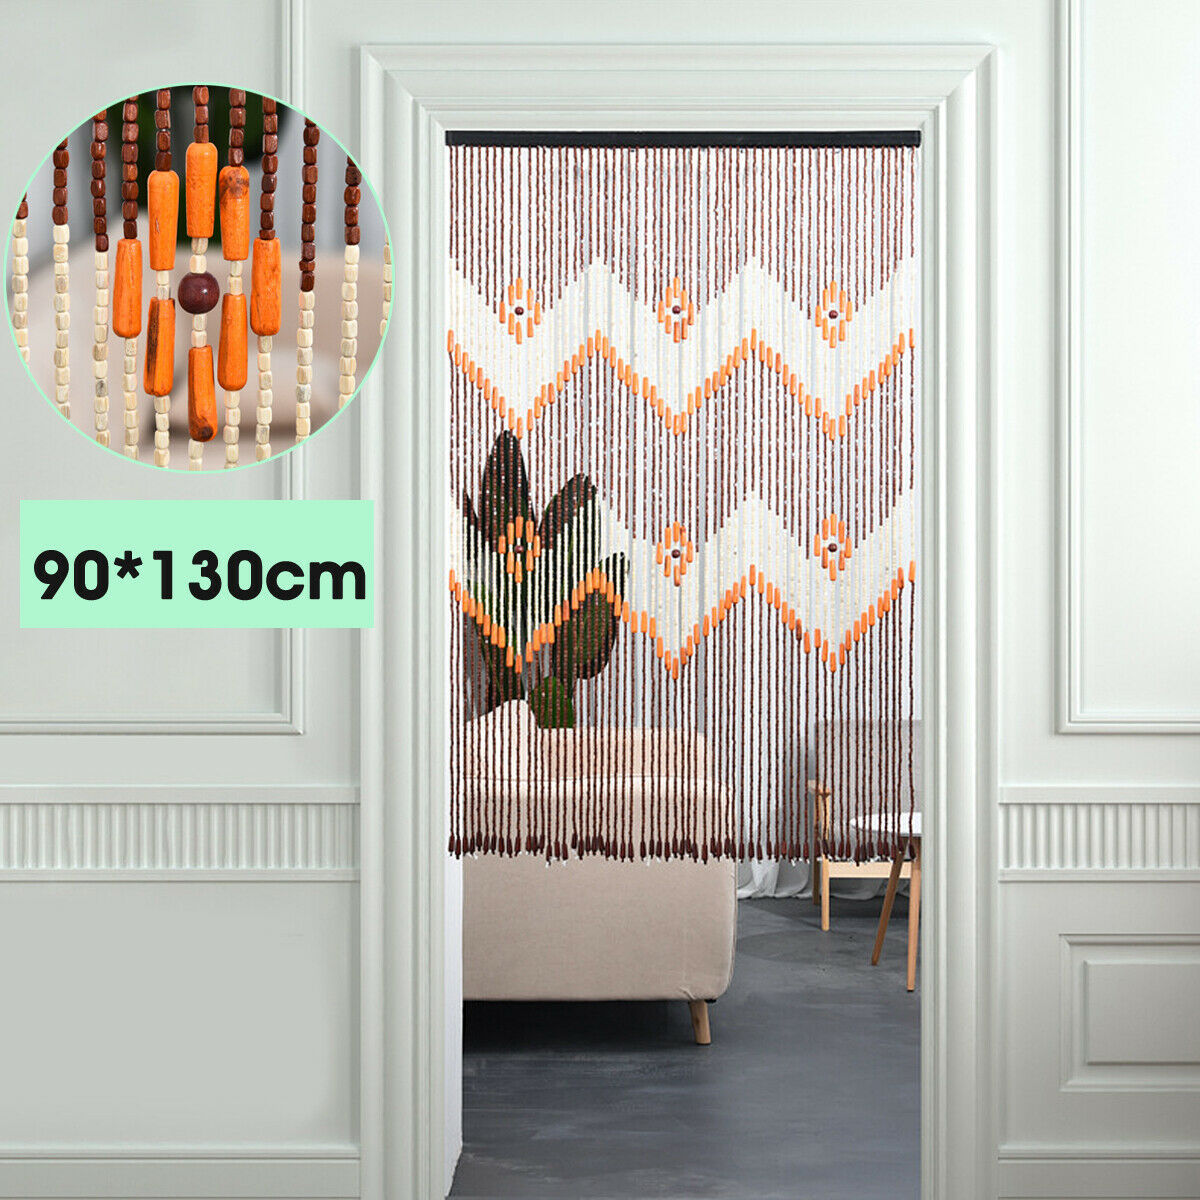 60 Line Wooden Bead Curtain Fly Screen Decor Porch Bedroom Living Room 90*130cm